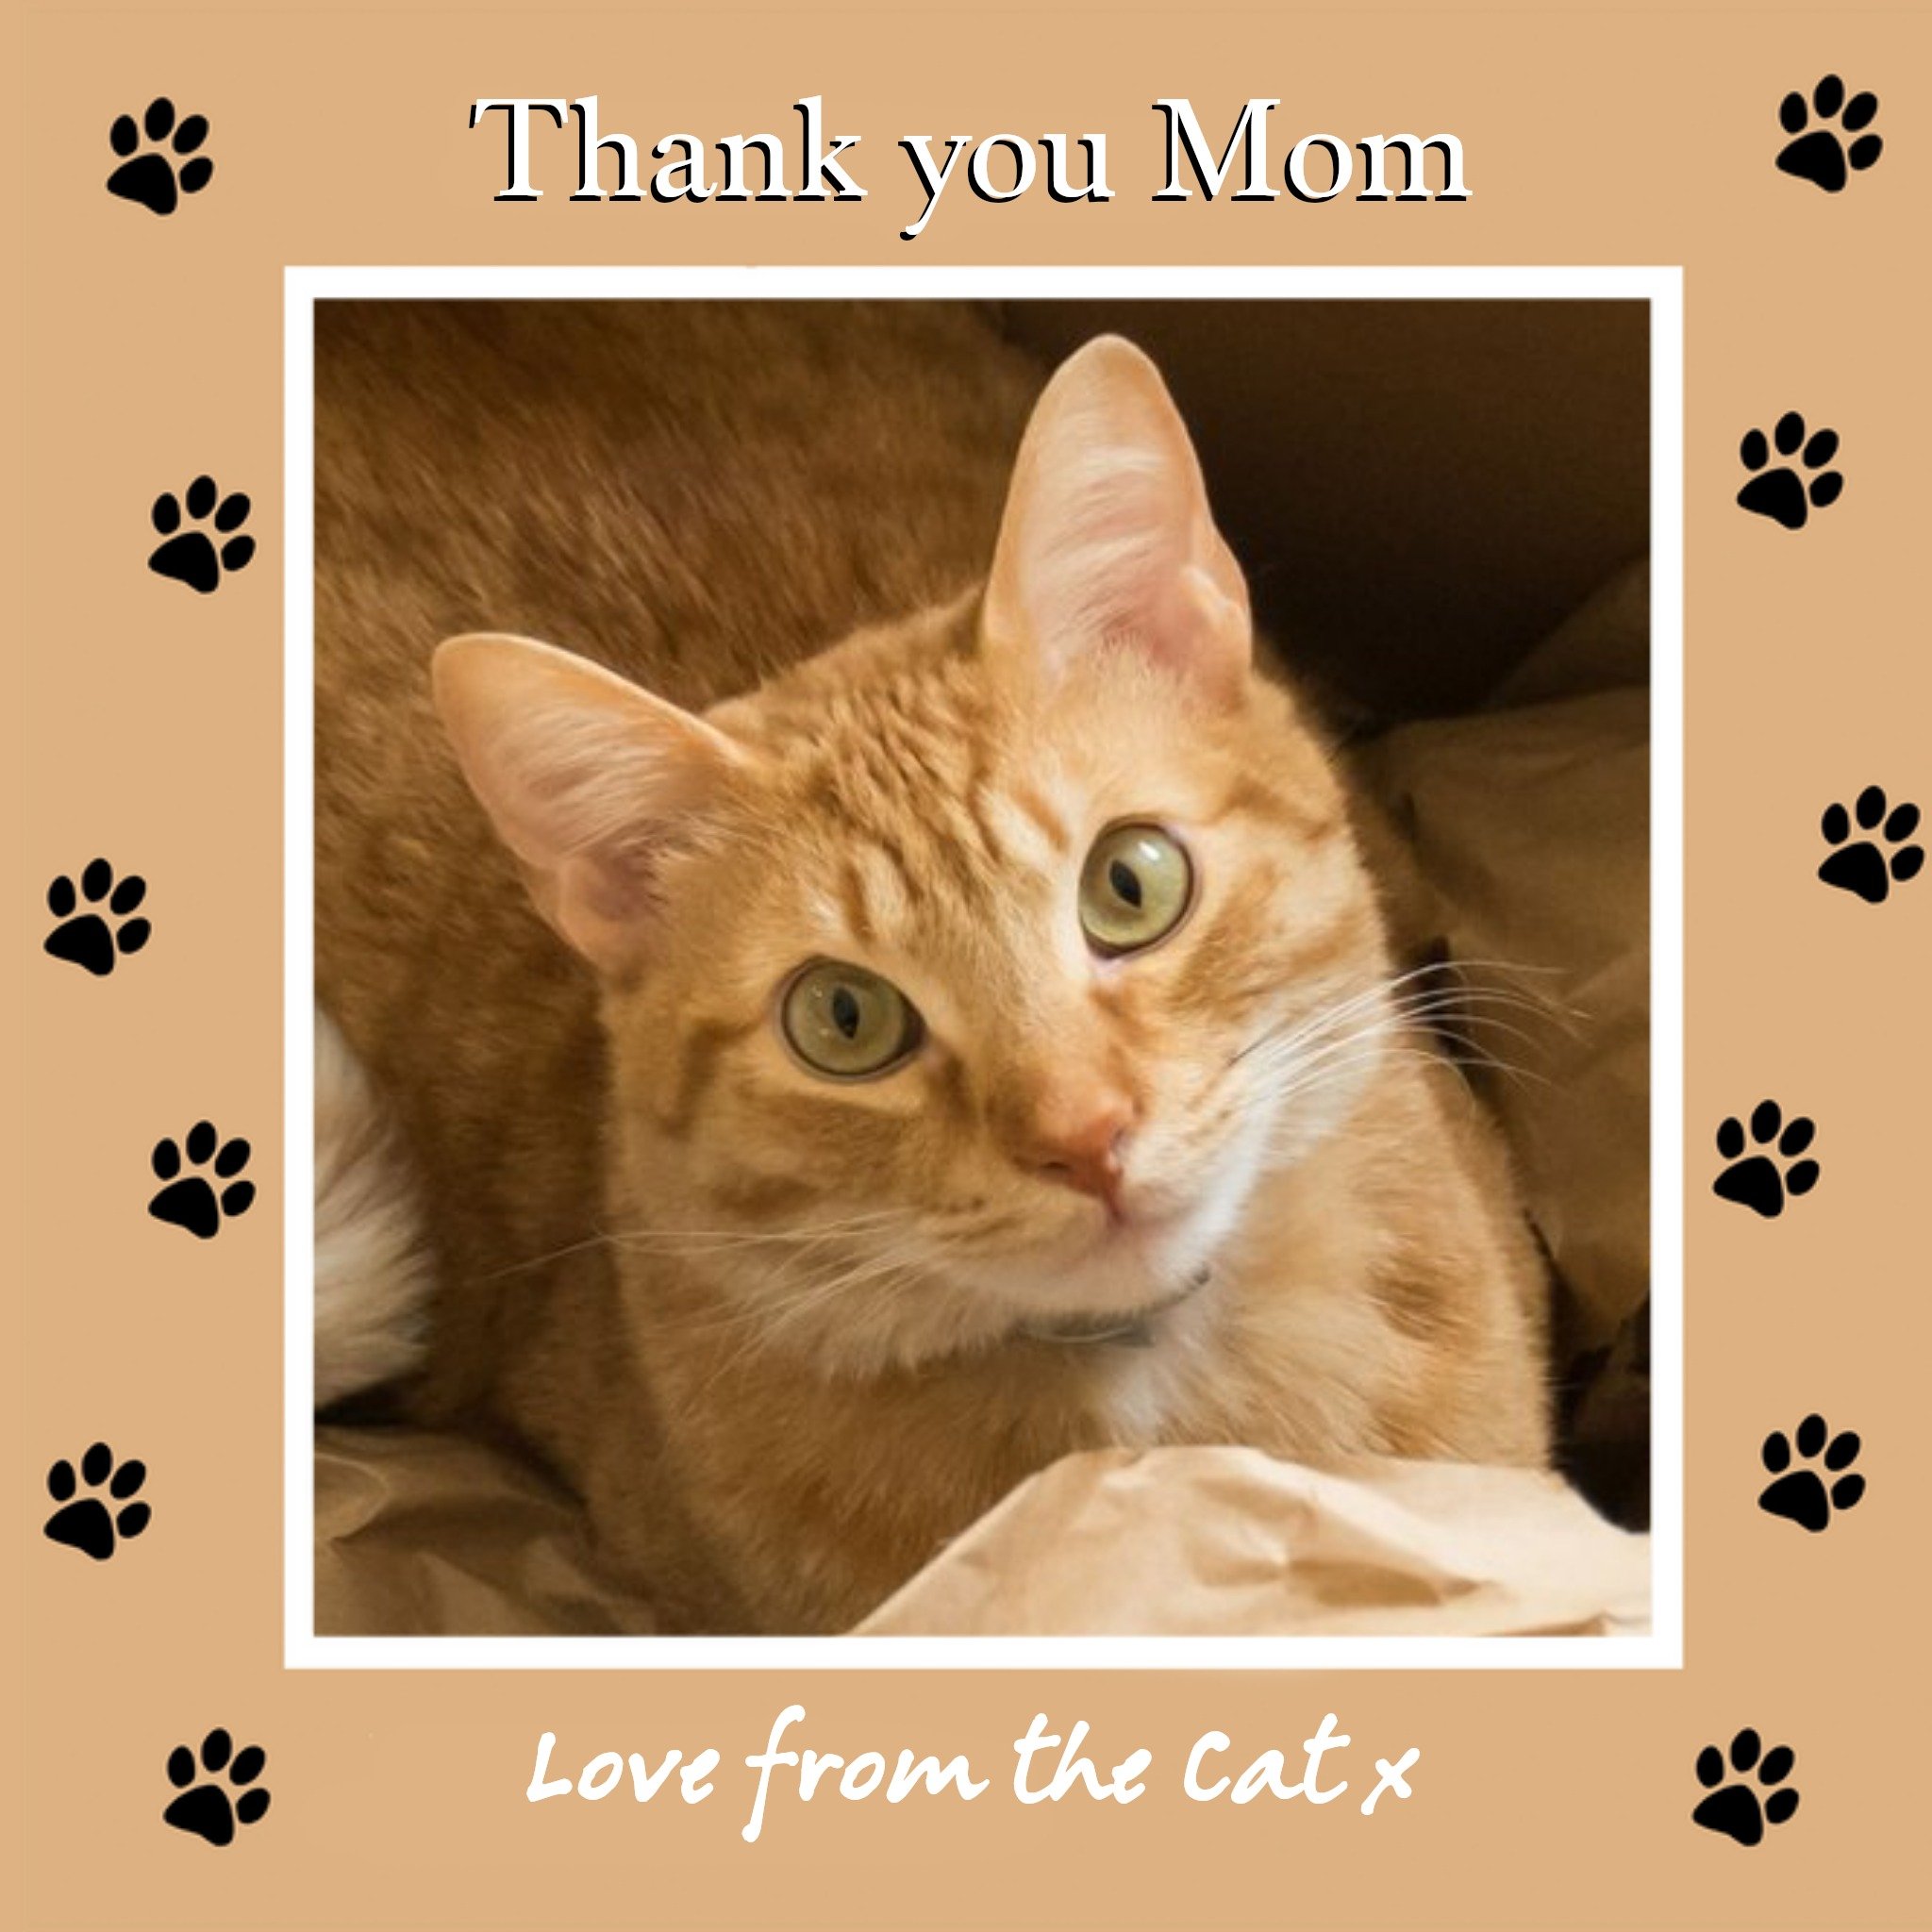 Moonpig Alex Sharp Photographic Cat Photo Upload Thank You Card For Mom, Large